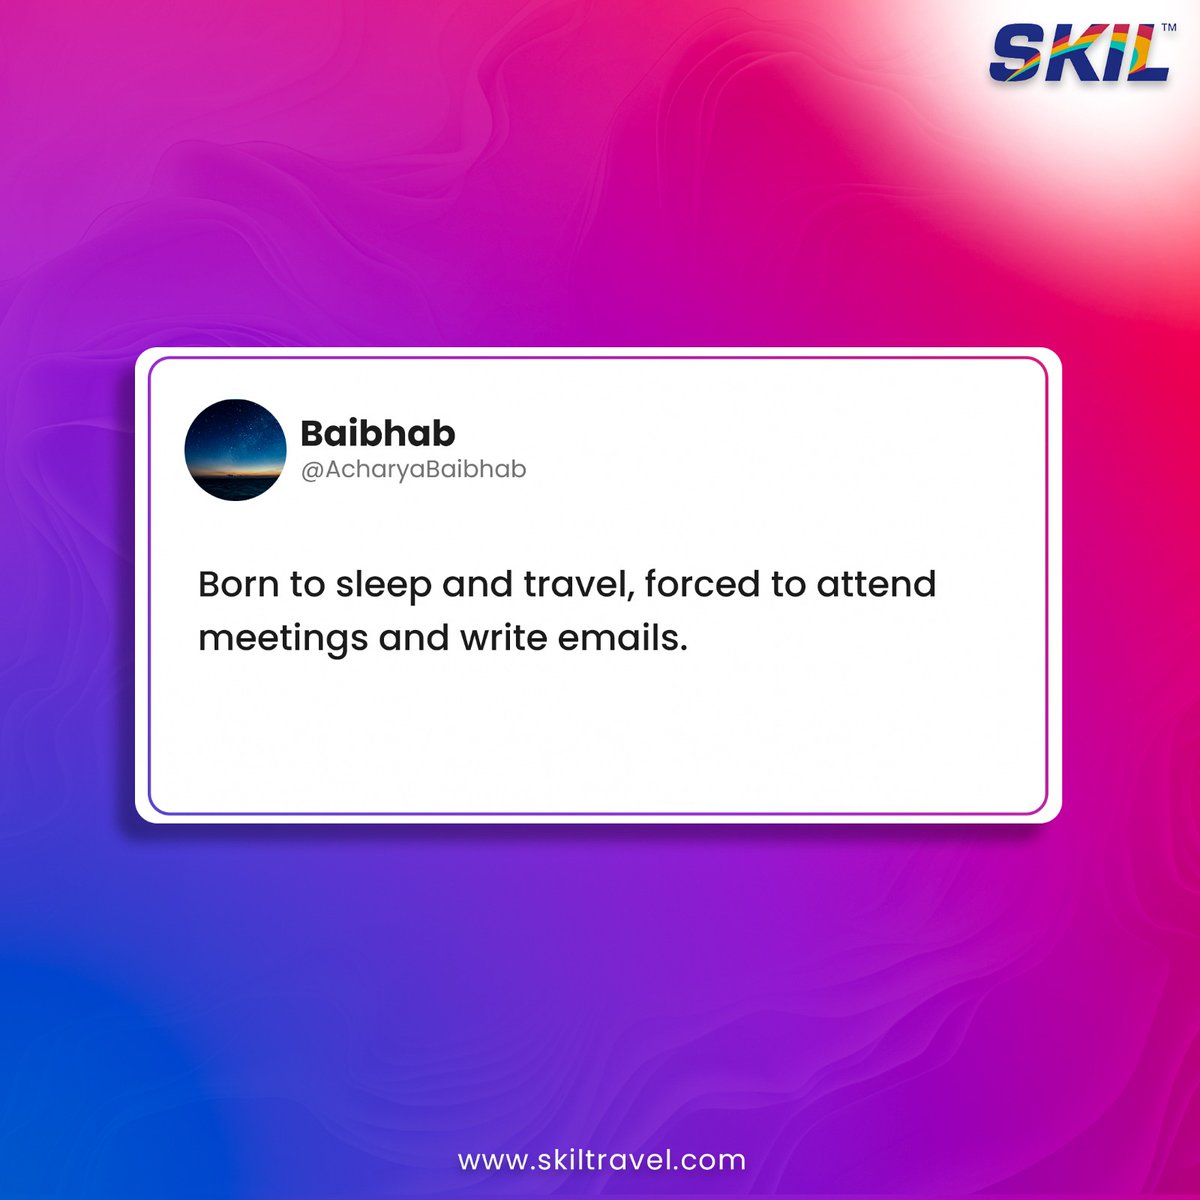 My spirit animal is a majestic eagle soaring through the sky. 🦅 Unfortunately, I'm currently trapped in the body of a hamster powering a corporate wheel. 🐹💼 #SKIL #SKILTravel #OfficeHumor #CorporateLife #Relatable #WorkStruggles #CreativeSoul #DreamVacation #corporatetravel